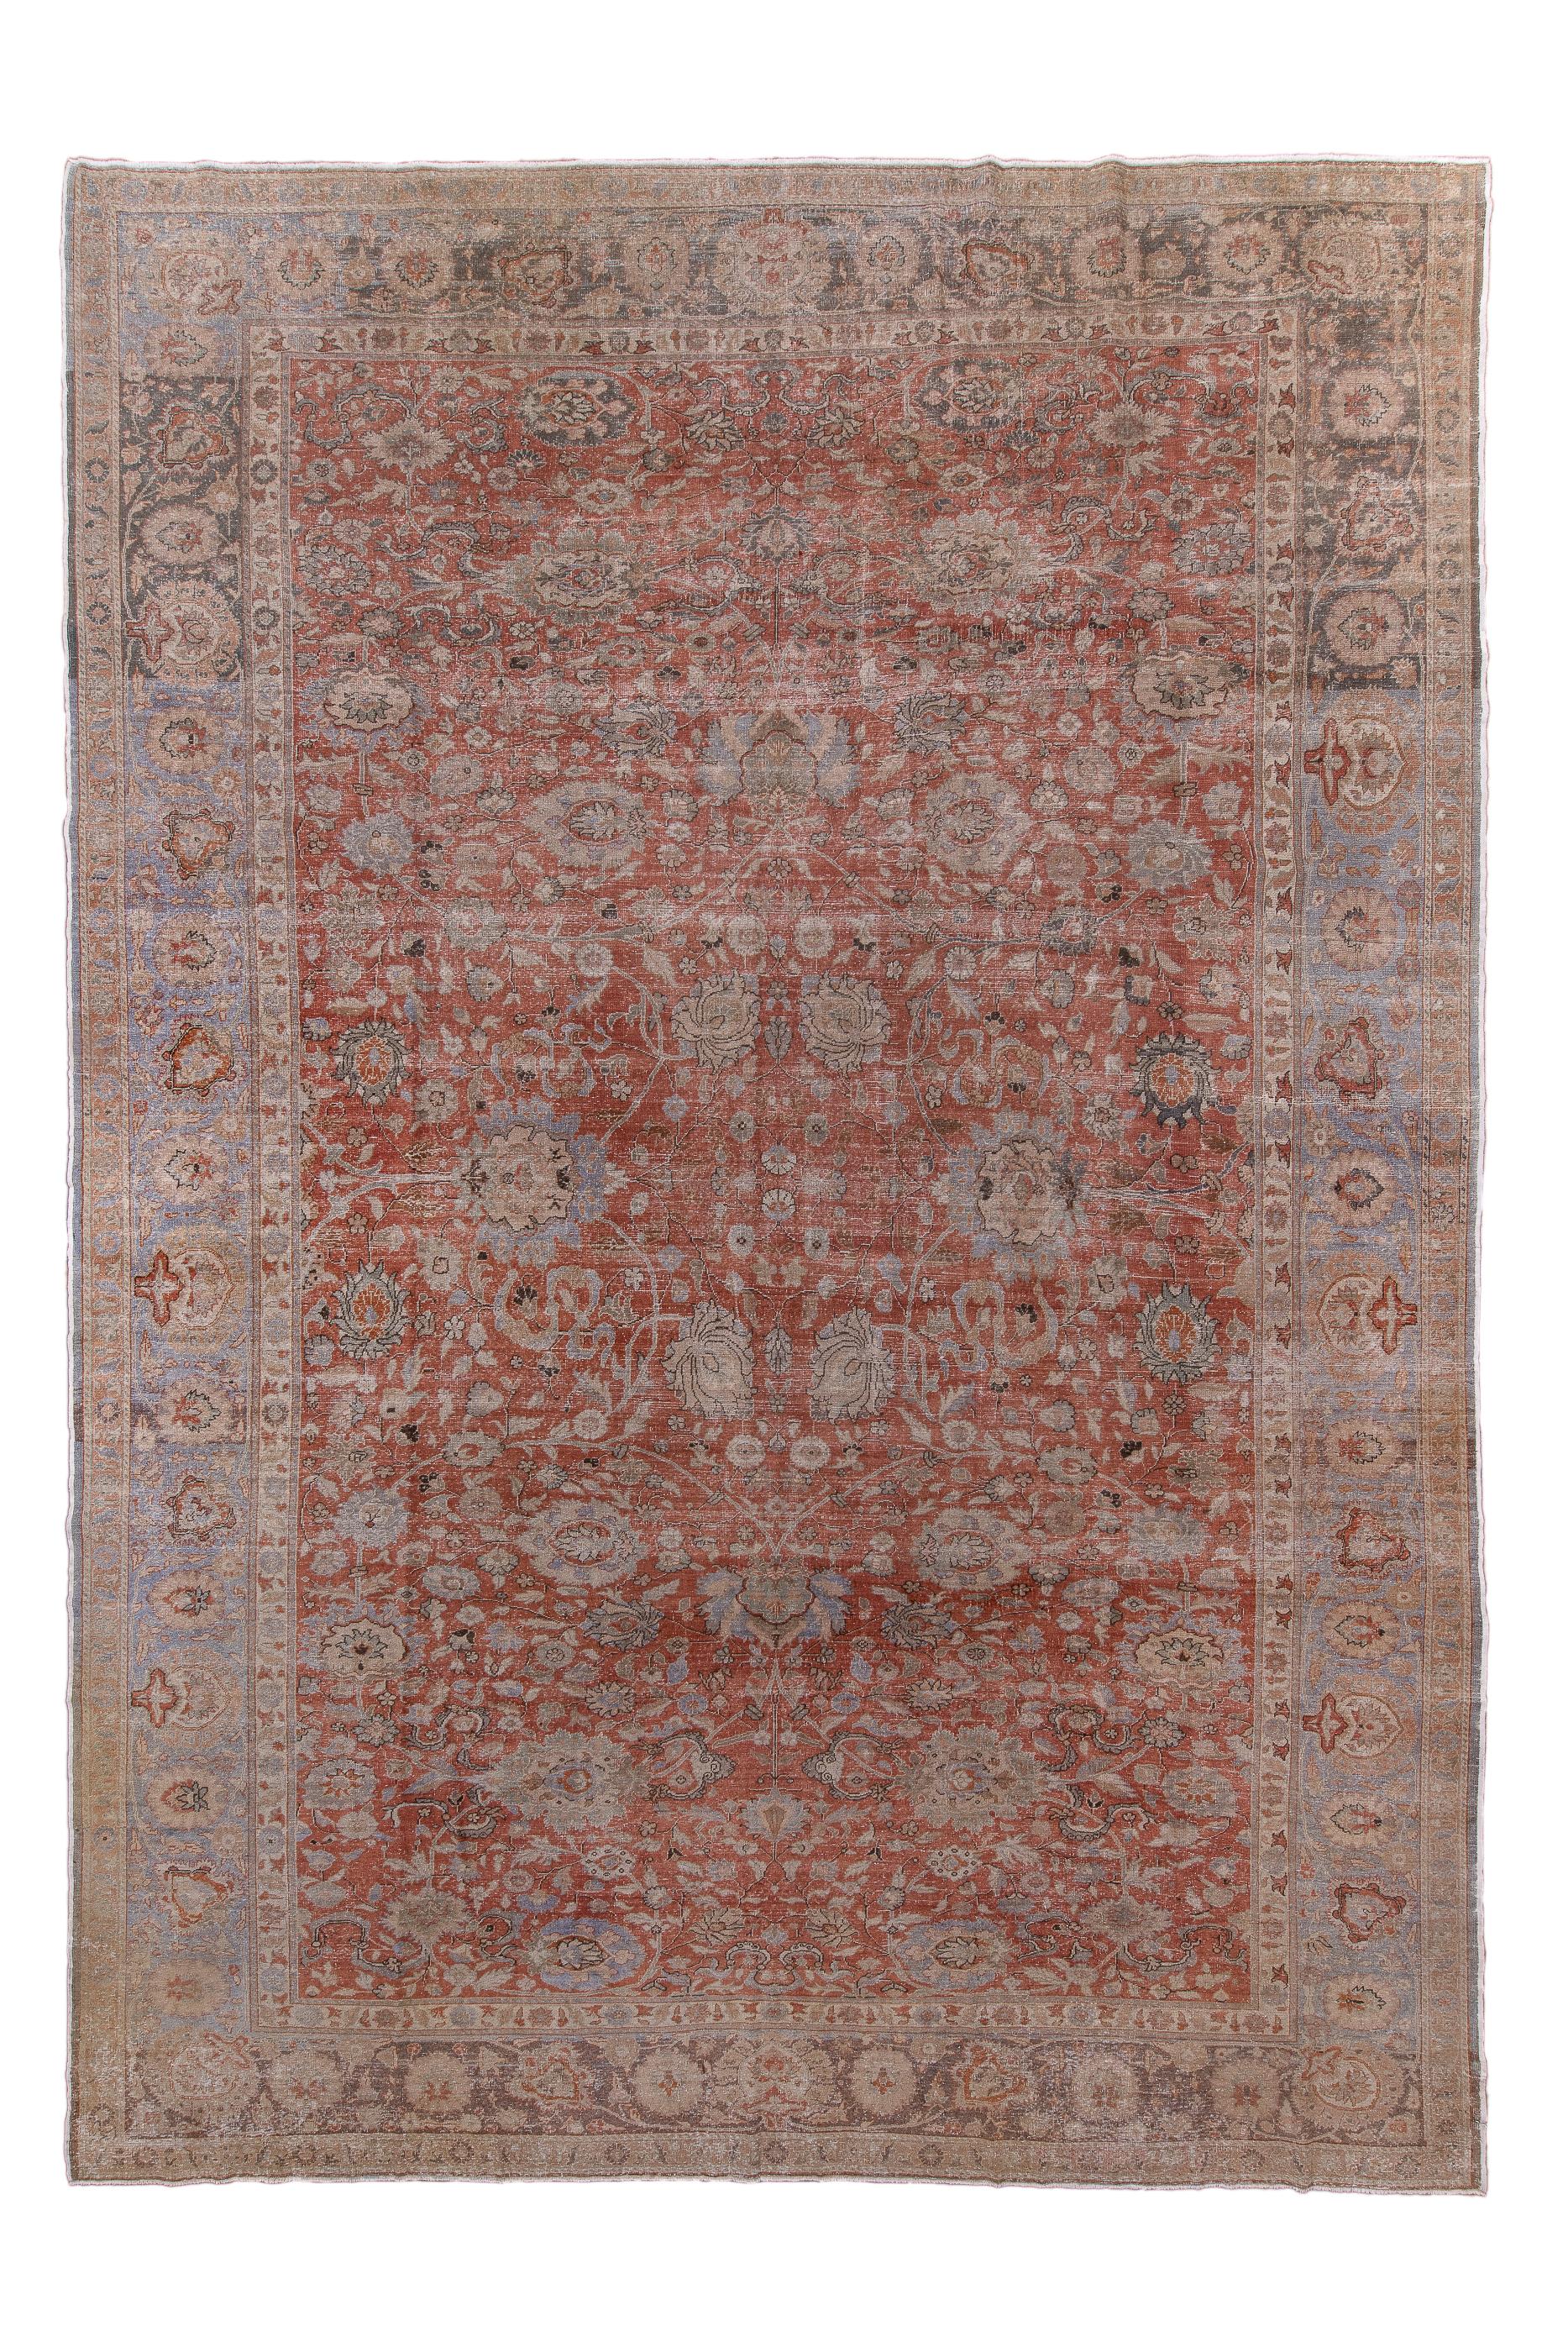 The rust field shows a well-drawn interpretation of a classic Persian design with cloud bands, in-and-out lazy palmettes, vinery, blossoms and up-and-down palmettes. Light blue main border with good petal palmette corner resolutions and tilted or